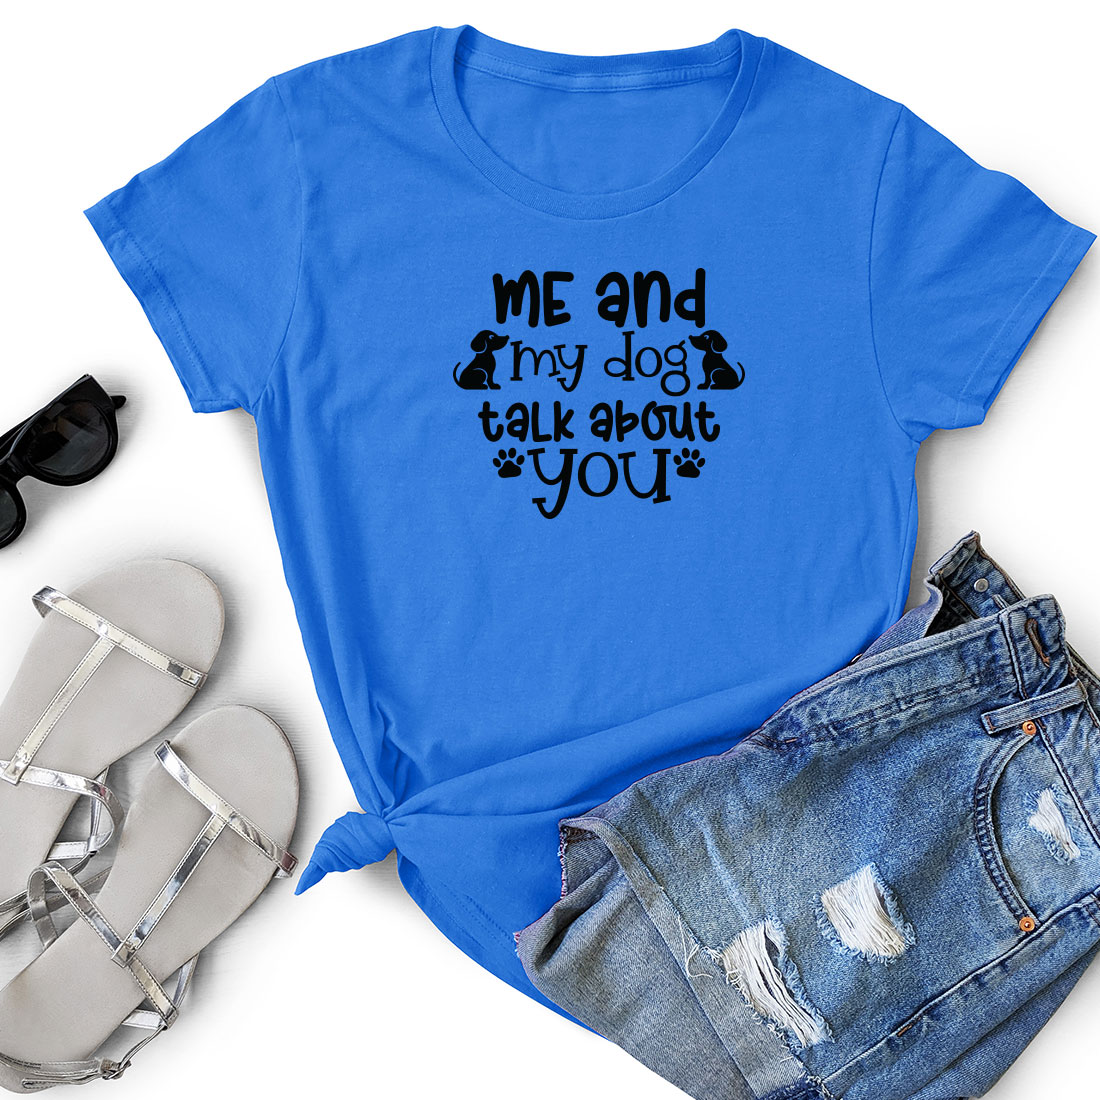 T - shirt that says me and my dog talk about you.